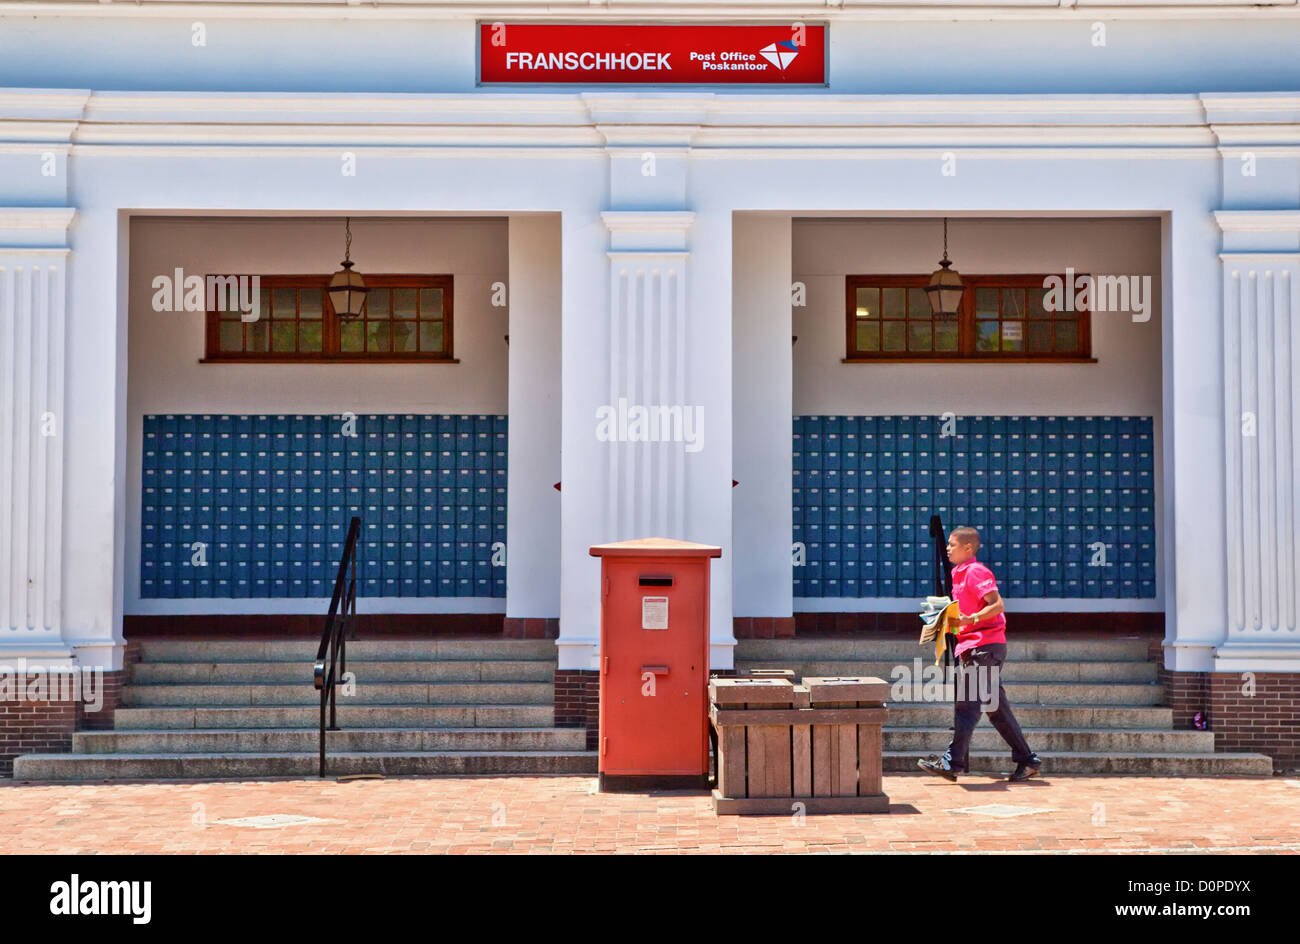 The Post Office in Franschhoek, a popular tourist destination in the Western Cape, South Africa Stock Photo